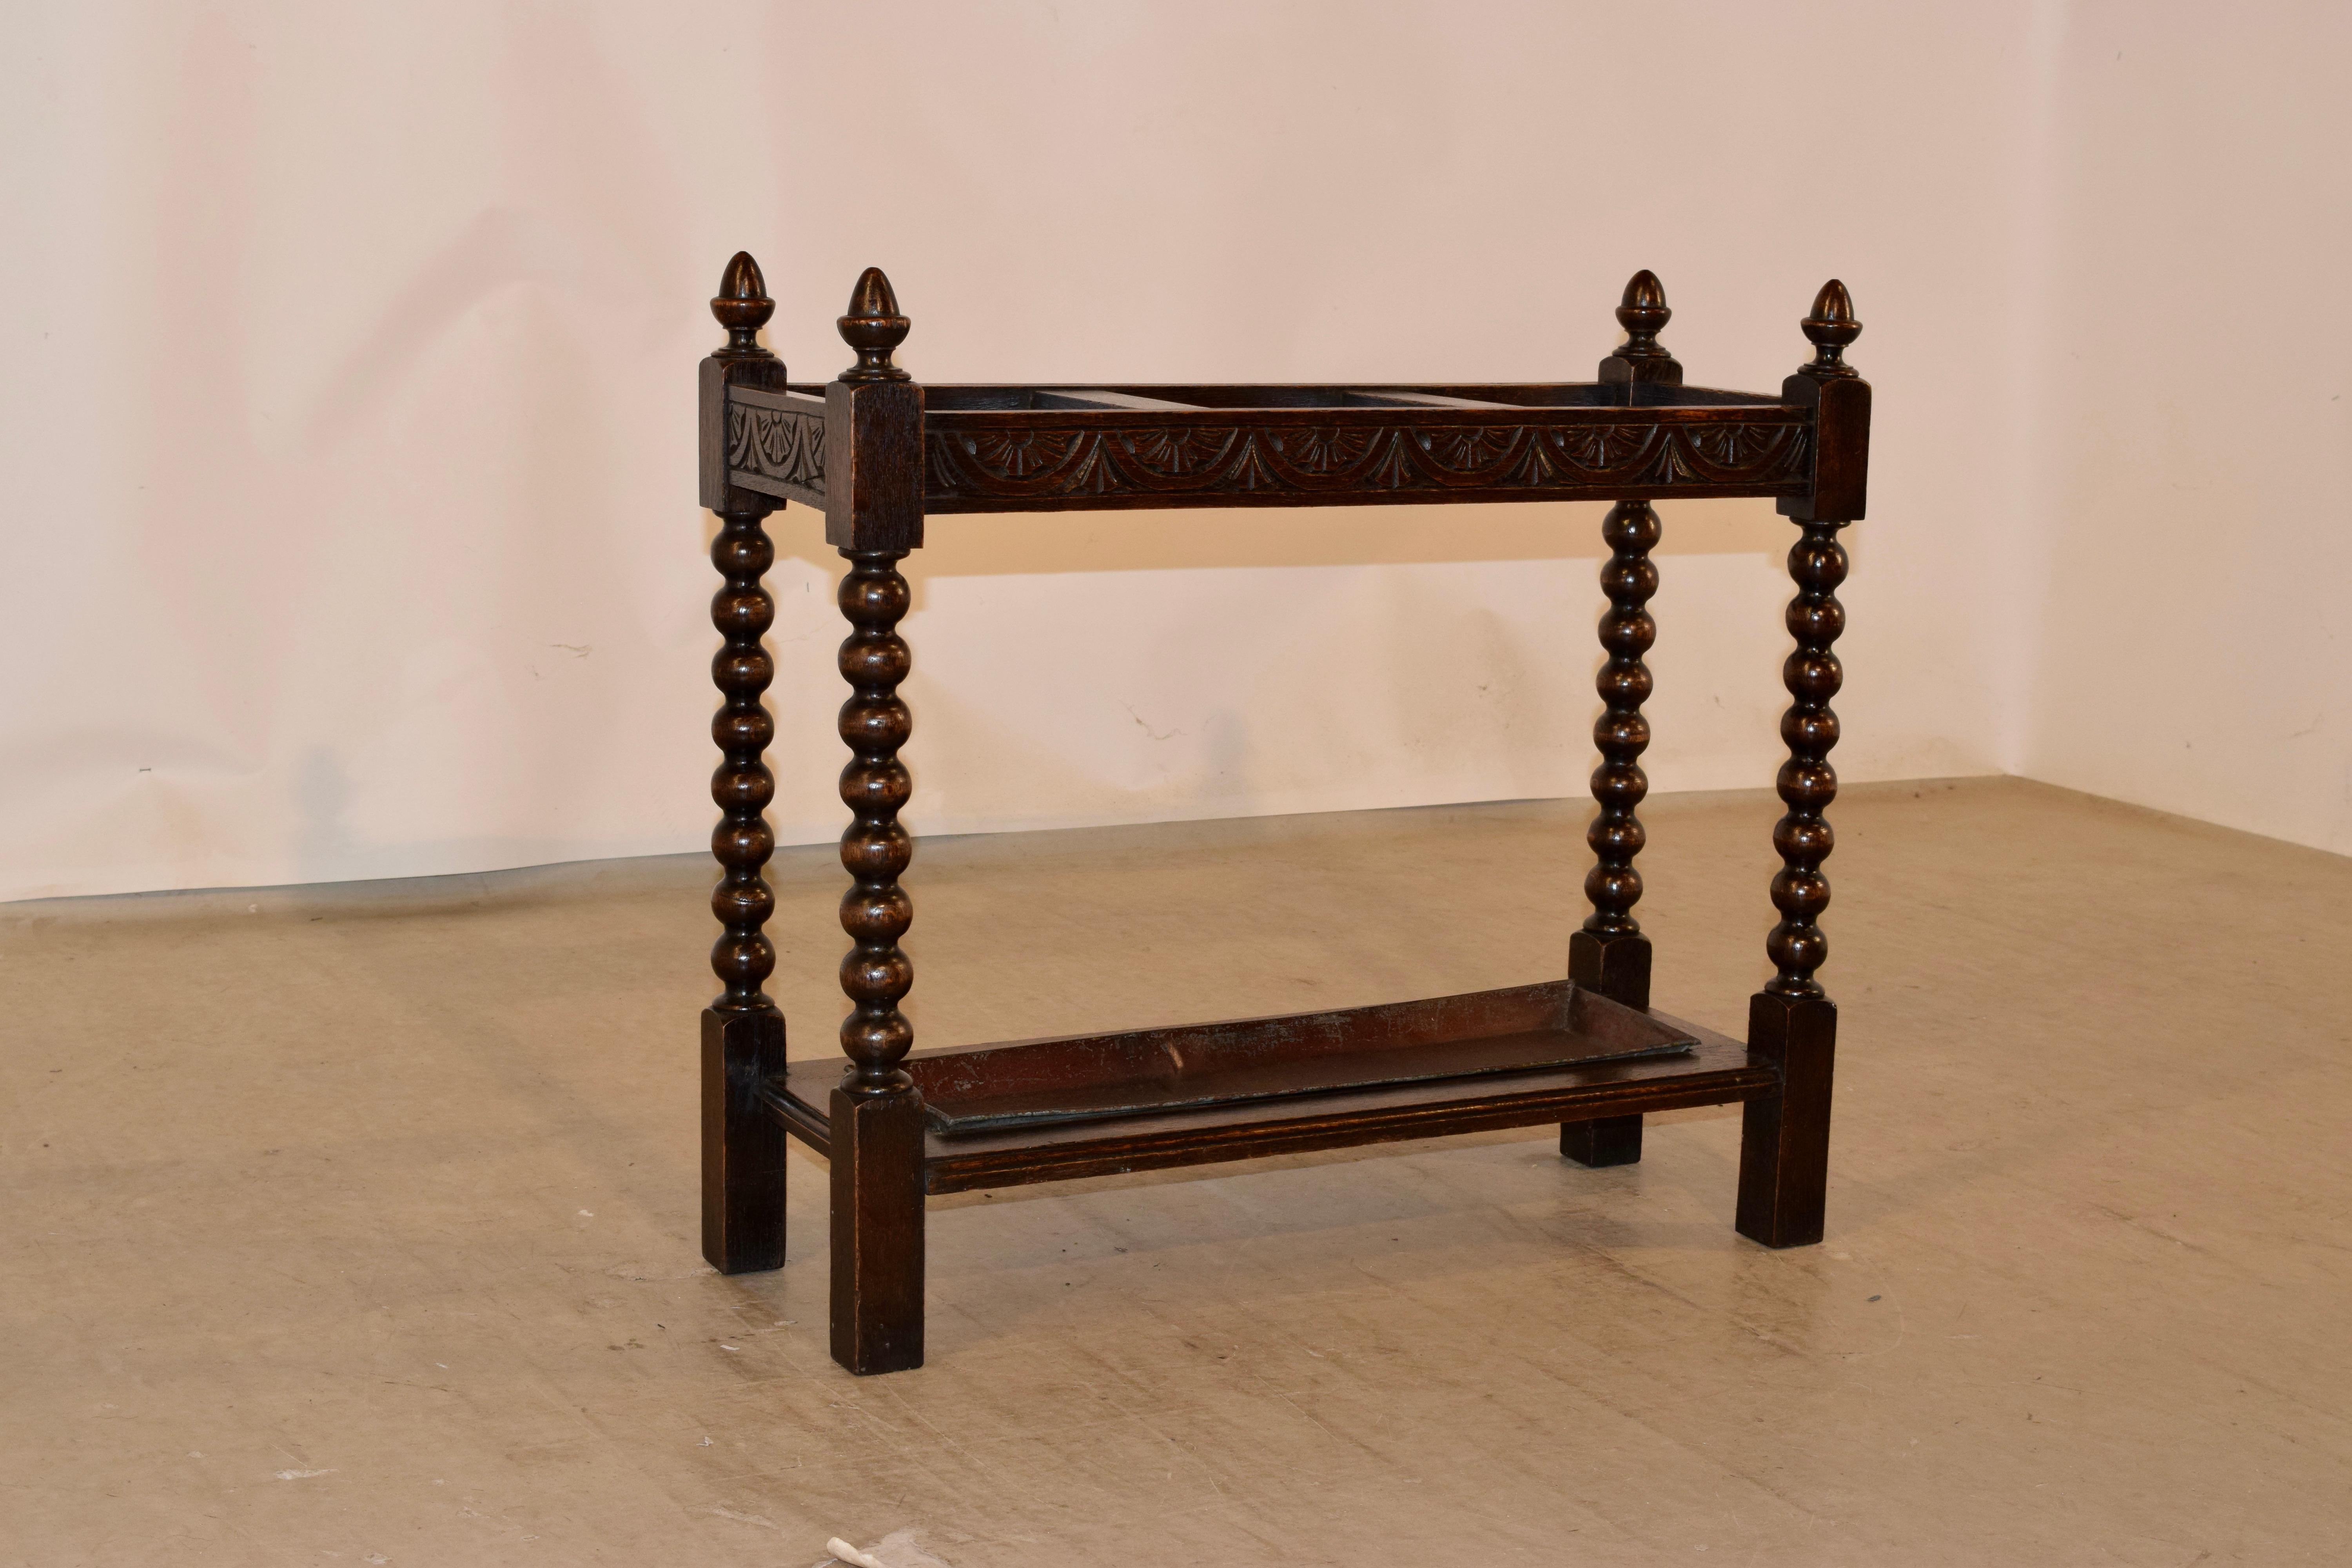 19th century oak umbrella stand from England. There are four hand turned finials over a top rail, which is hand carved with lunette design, supported on hand turned bobbin legs, which are connected by simple stretchers with molded edges, that